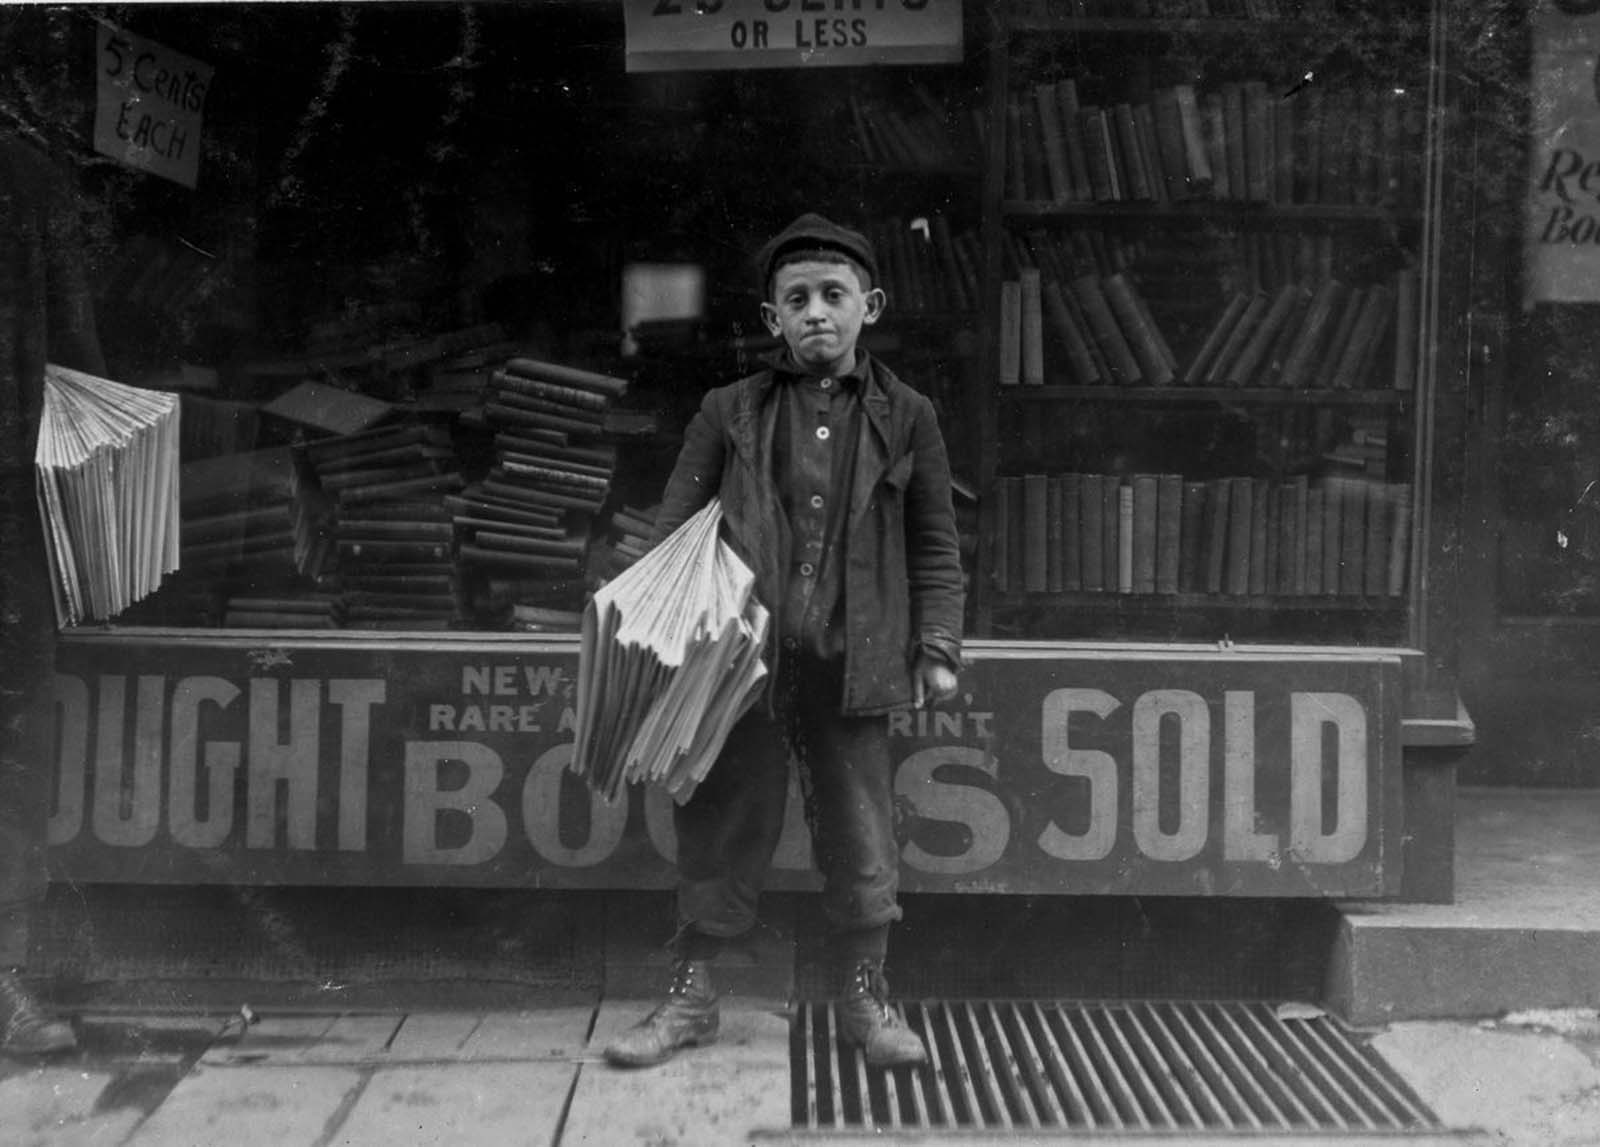 welve-year-old newsboy, Hyman Alpert, been selling three years. Spends evenings in Boys Club. New Haven, Connecticut, 1909.